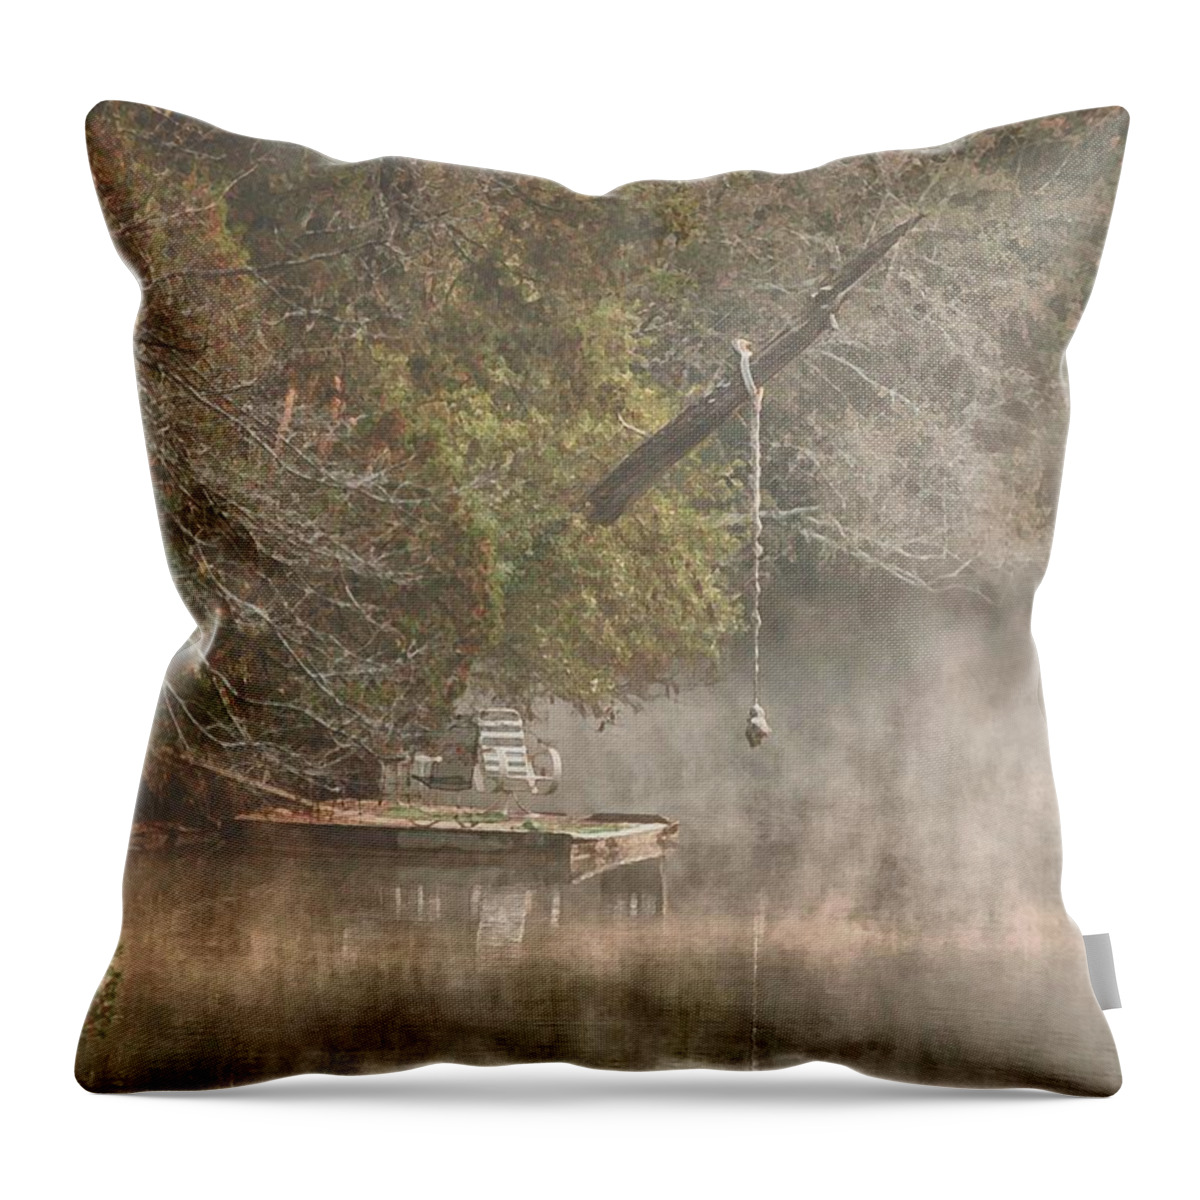 Alabama Throw Pillow featuring the digital art Chairs in the Mist by Michael Thomas